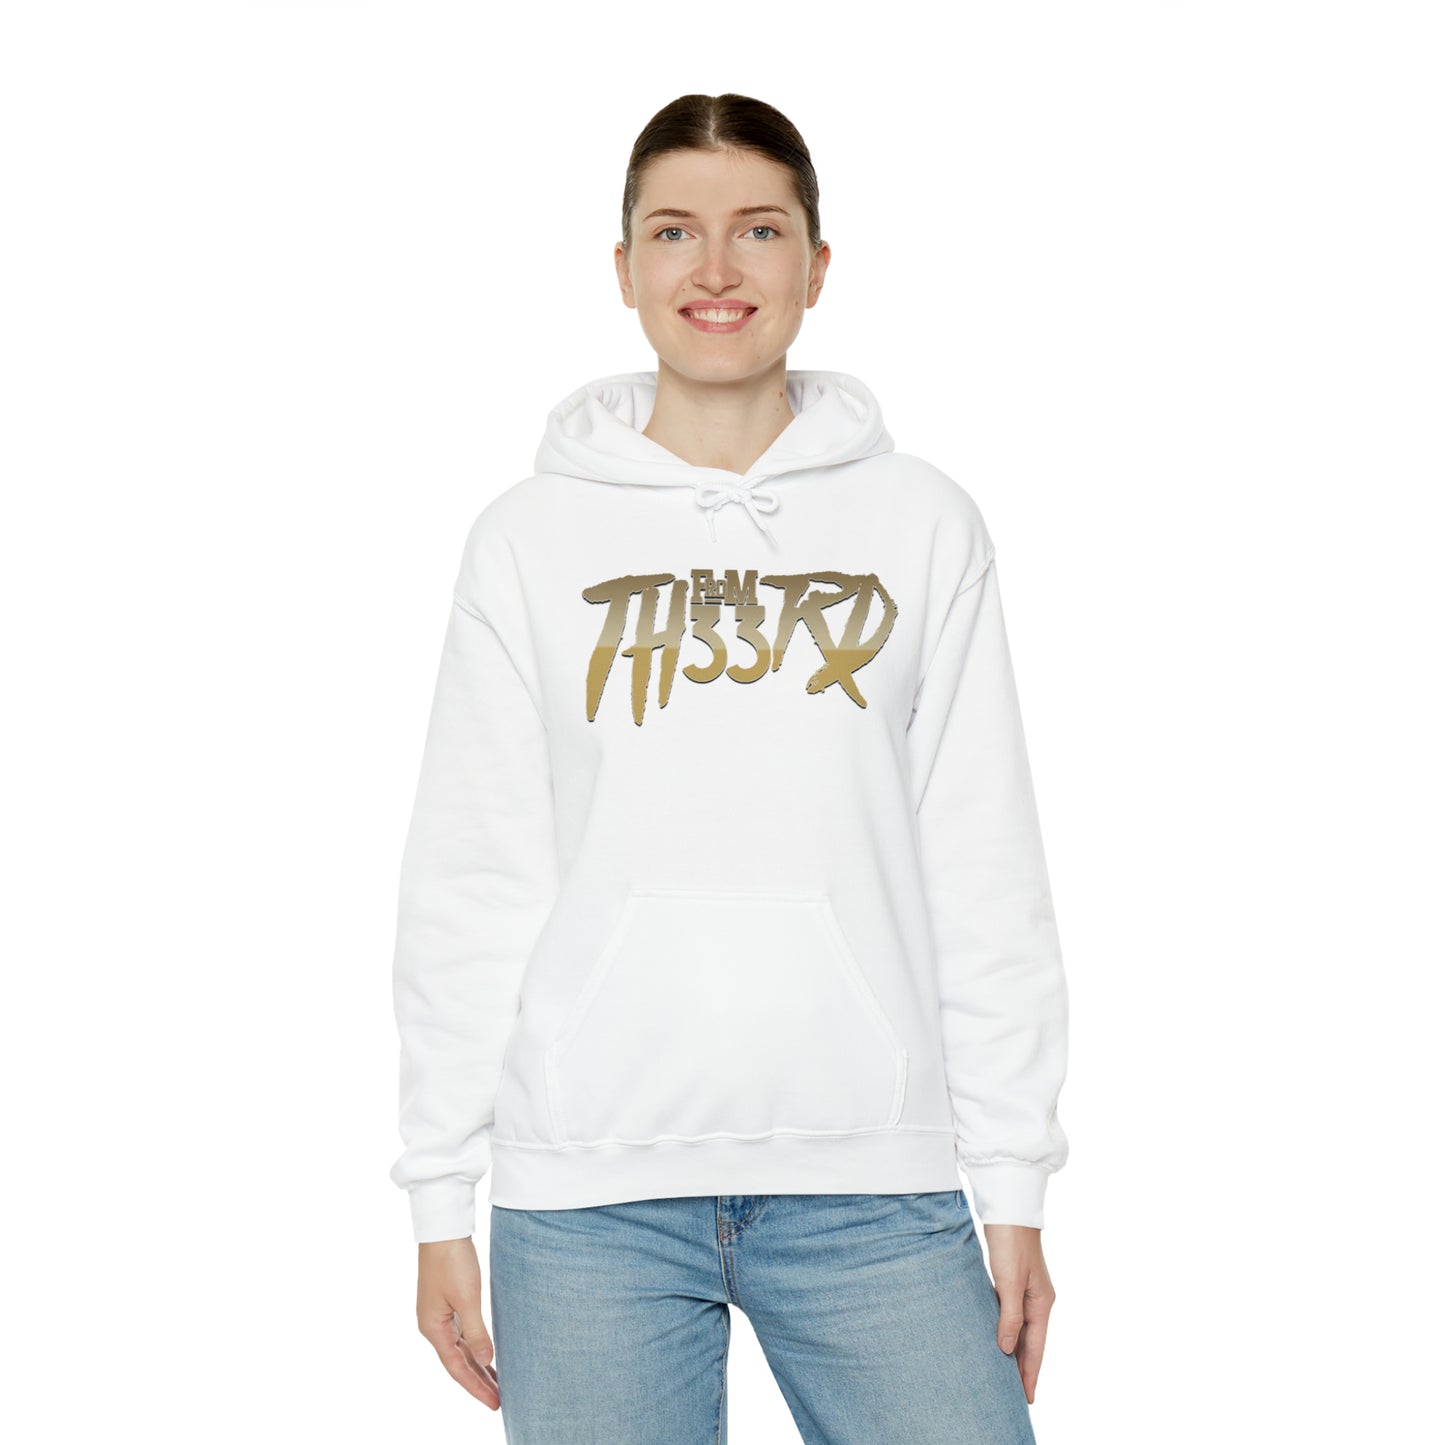 Fromth33rd Hooded Sweatshirt (Gold)